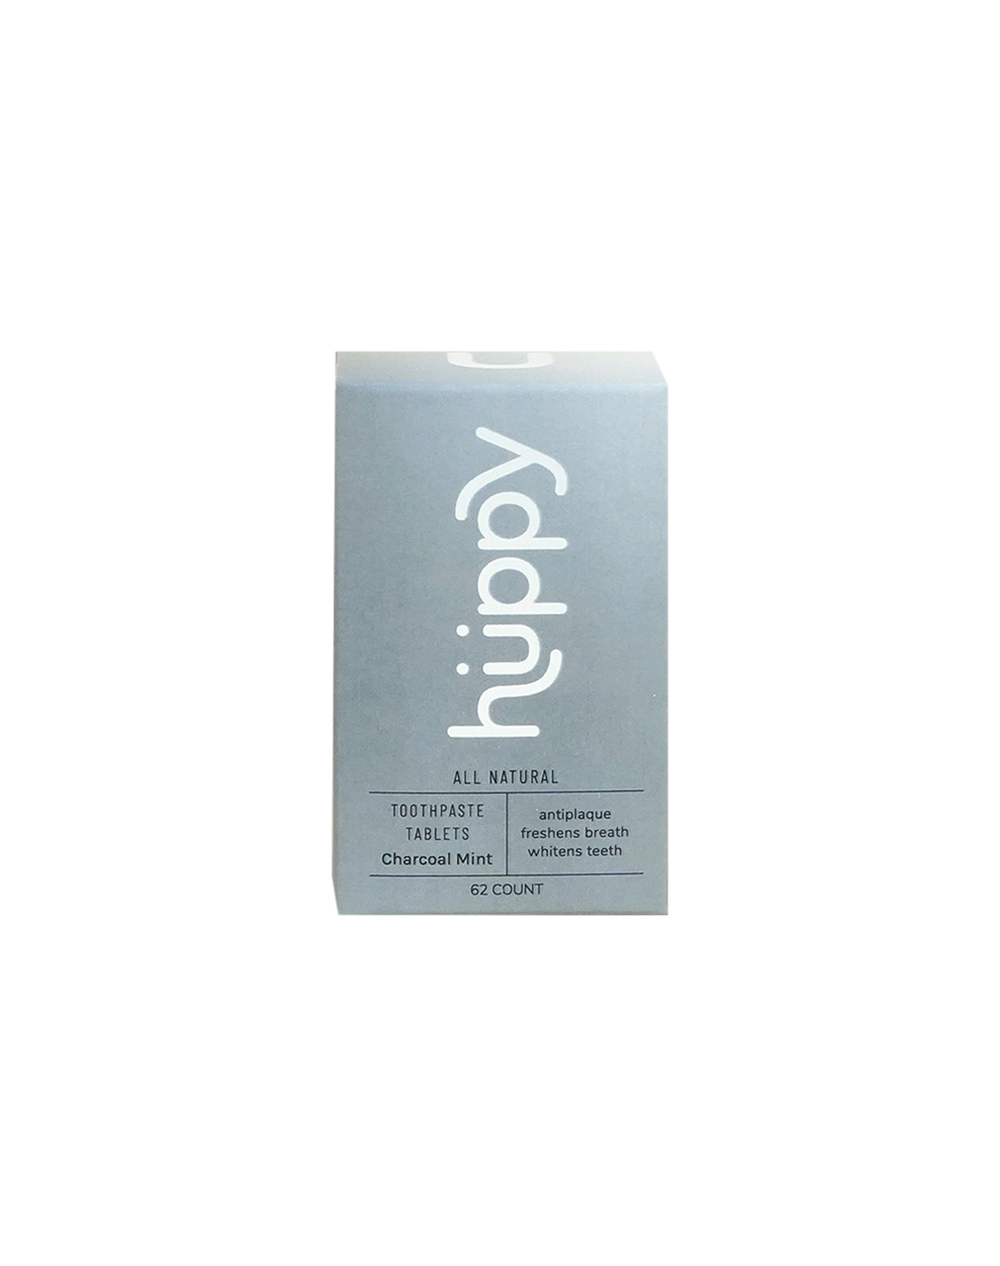 Huppy Toothpaste Tablets, Box Huppy Charcoal Mint